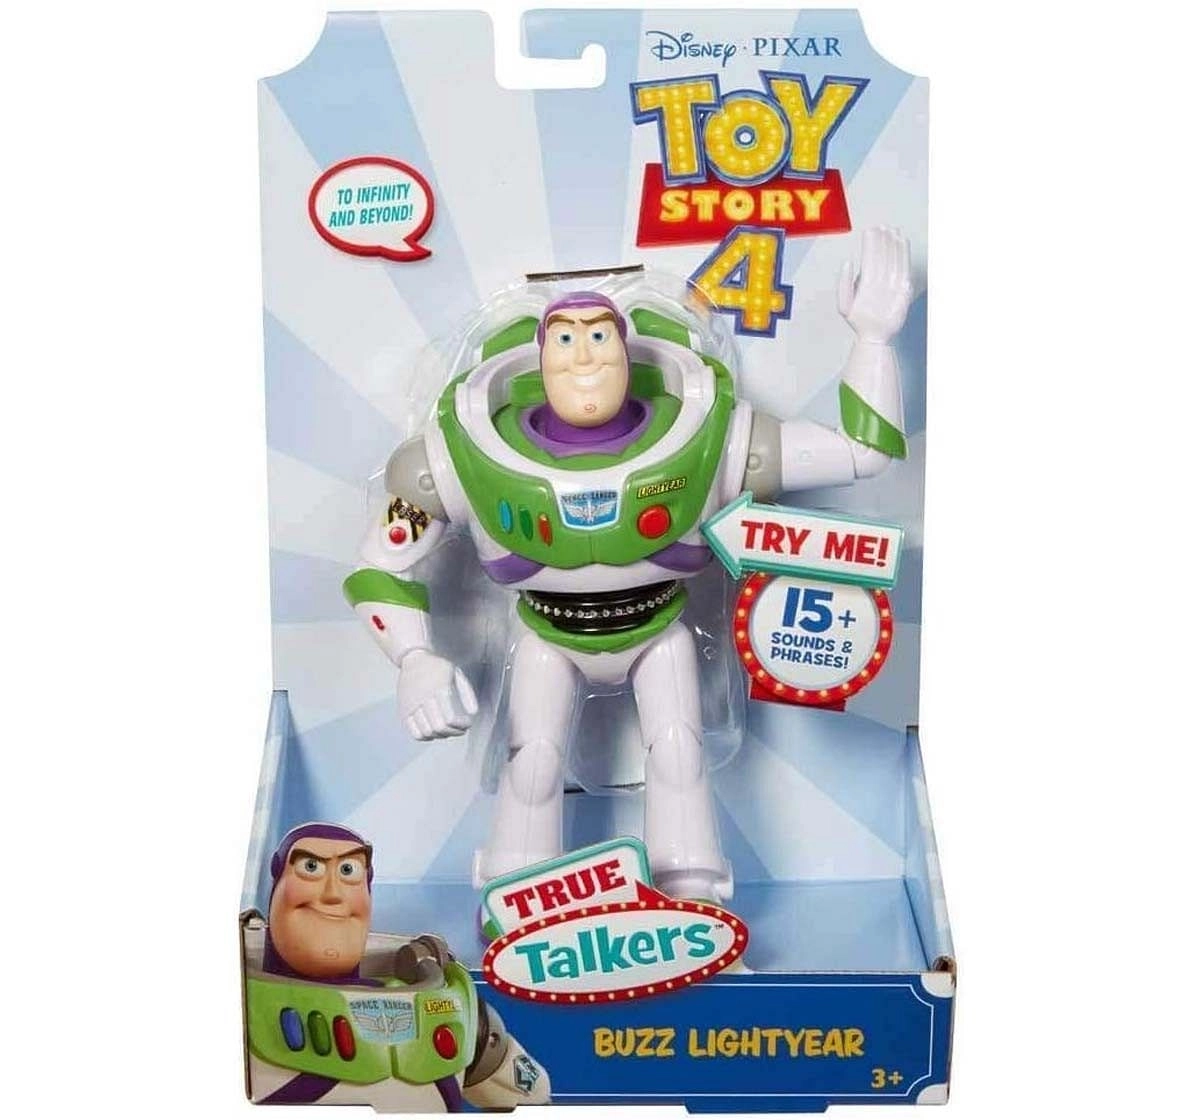 Toy Story 4- 7" Inch Talking Figure Asstored Action Figures for Kids age 3Y+, Assorted